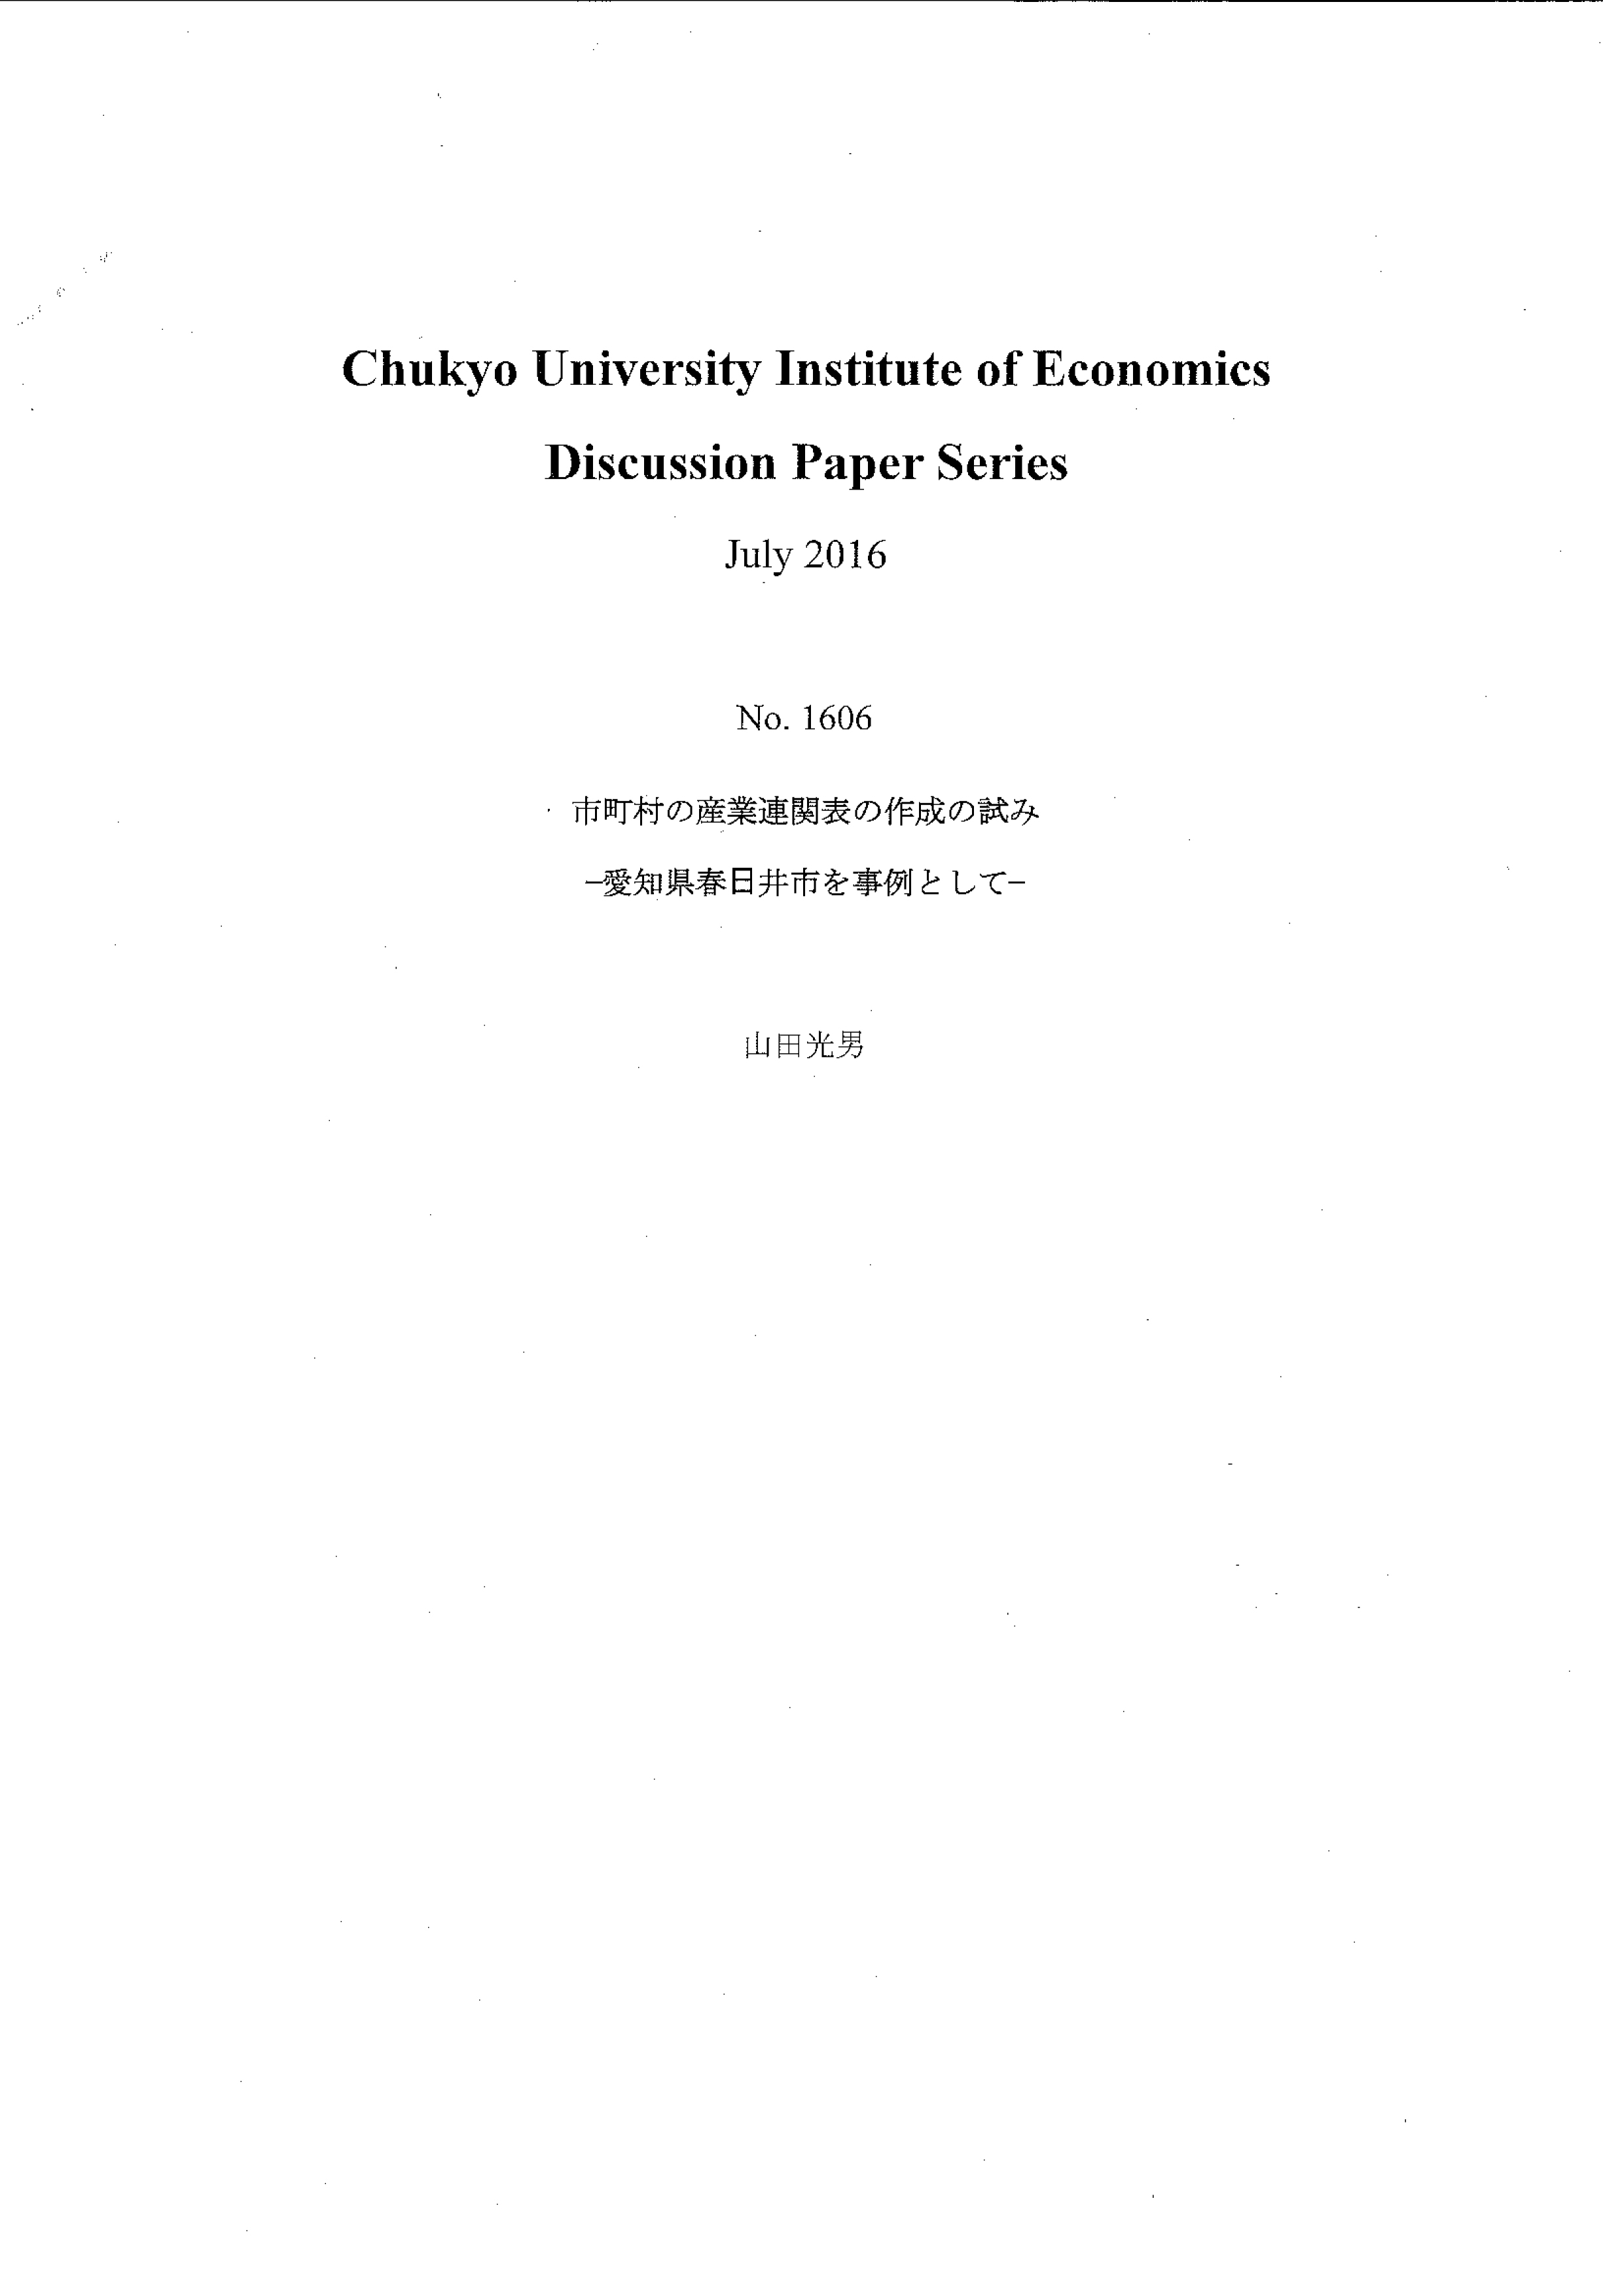 Discussion Paper Series No.1606